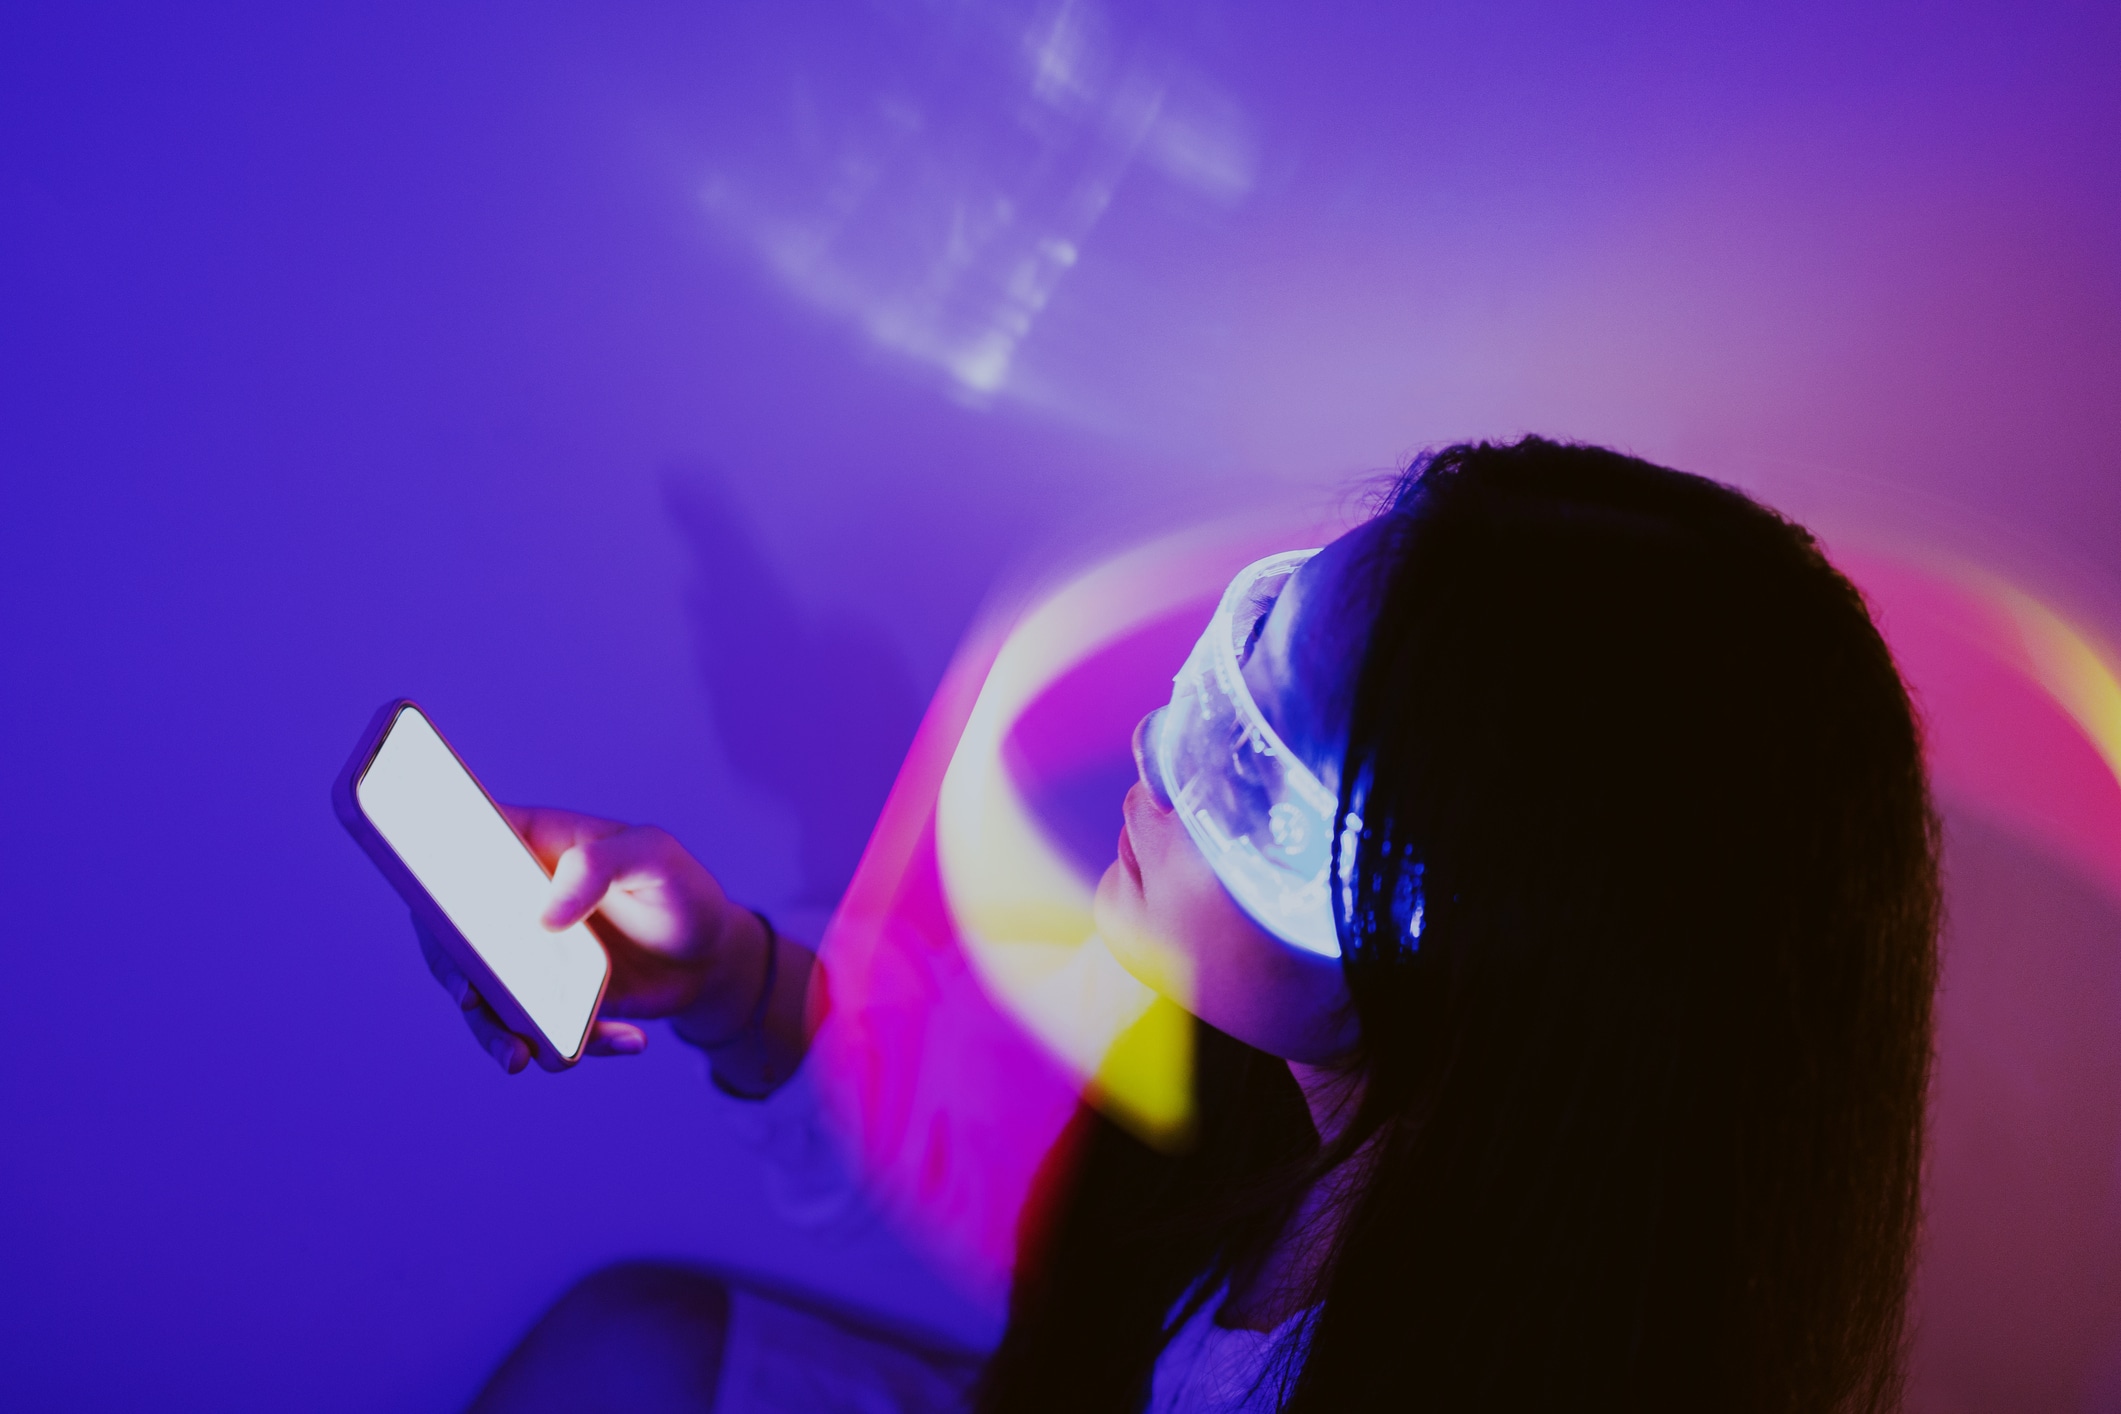 Asian woman using smartphone surrounded by beams of light. Metaverse and Artificial Intelligence